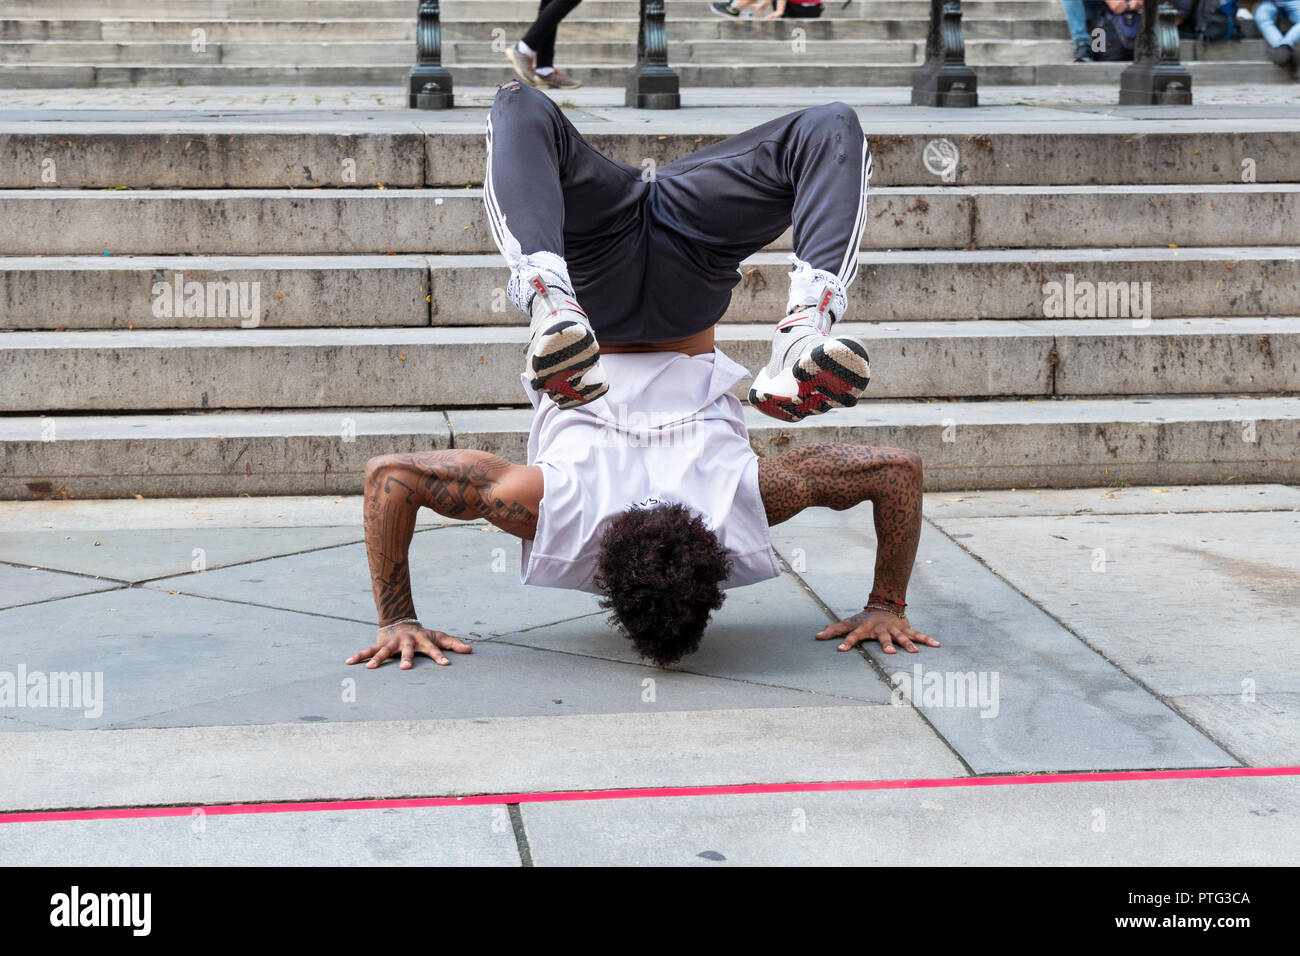 STREET PERFORMER. An acrobatic breakdancing busker doing a handstand in front of the main branch of the NY Public Library on Fifth Ave. in Manhattan. Stock Photo